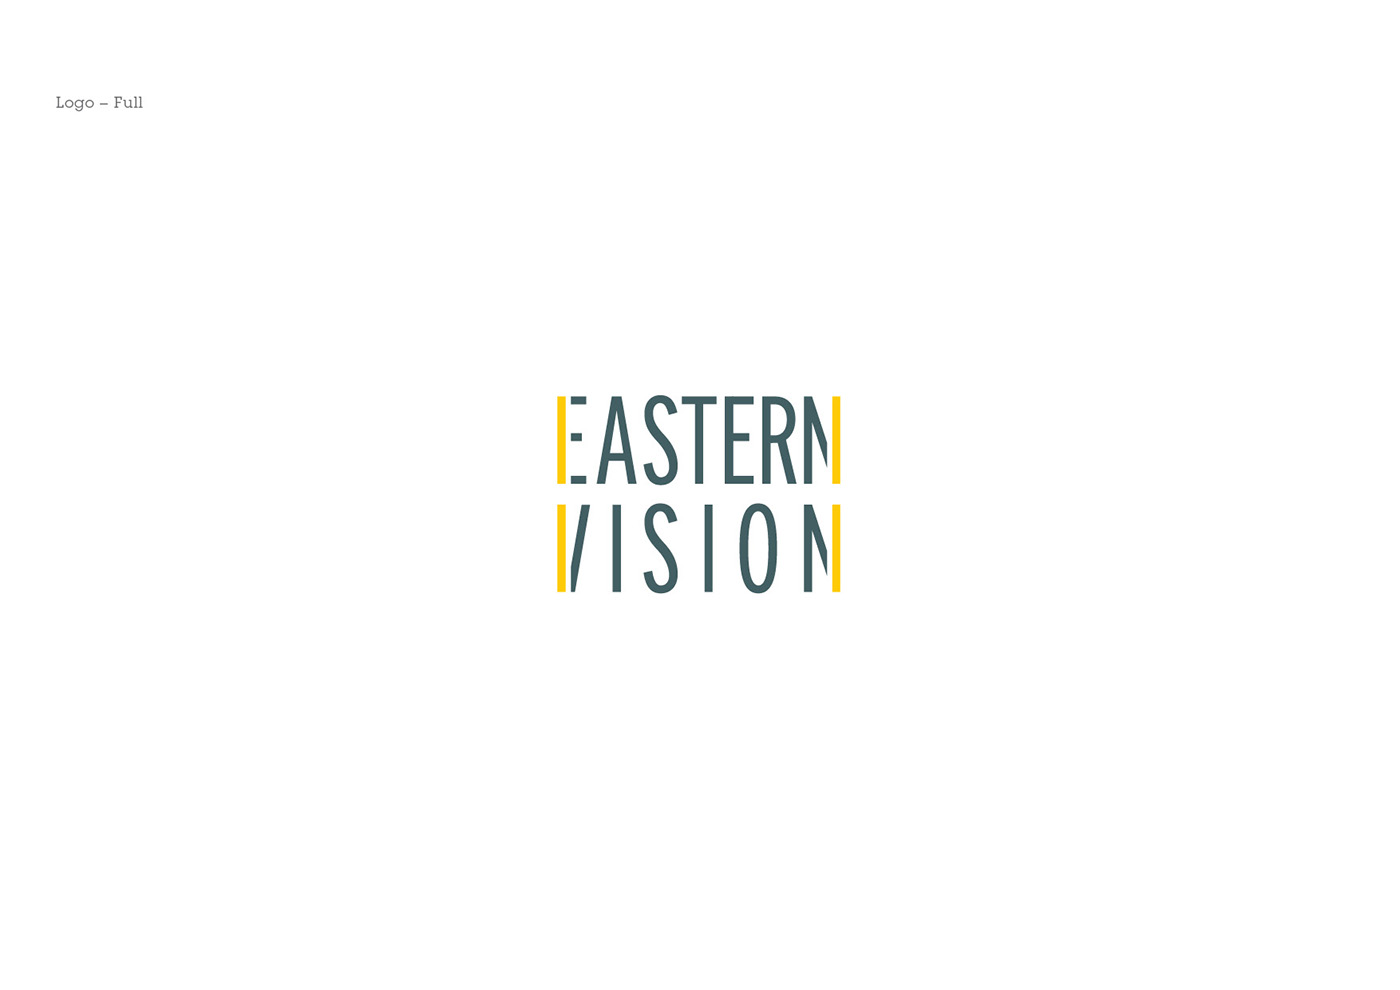 Eastern vison Global tour Students worldwide insights road insiders